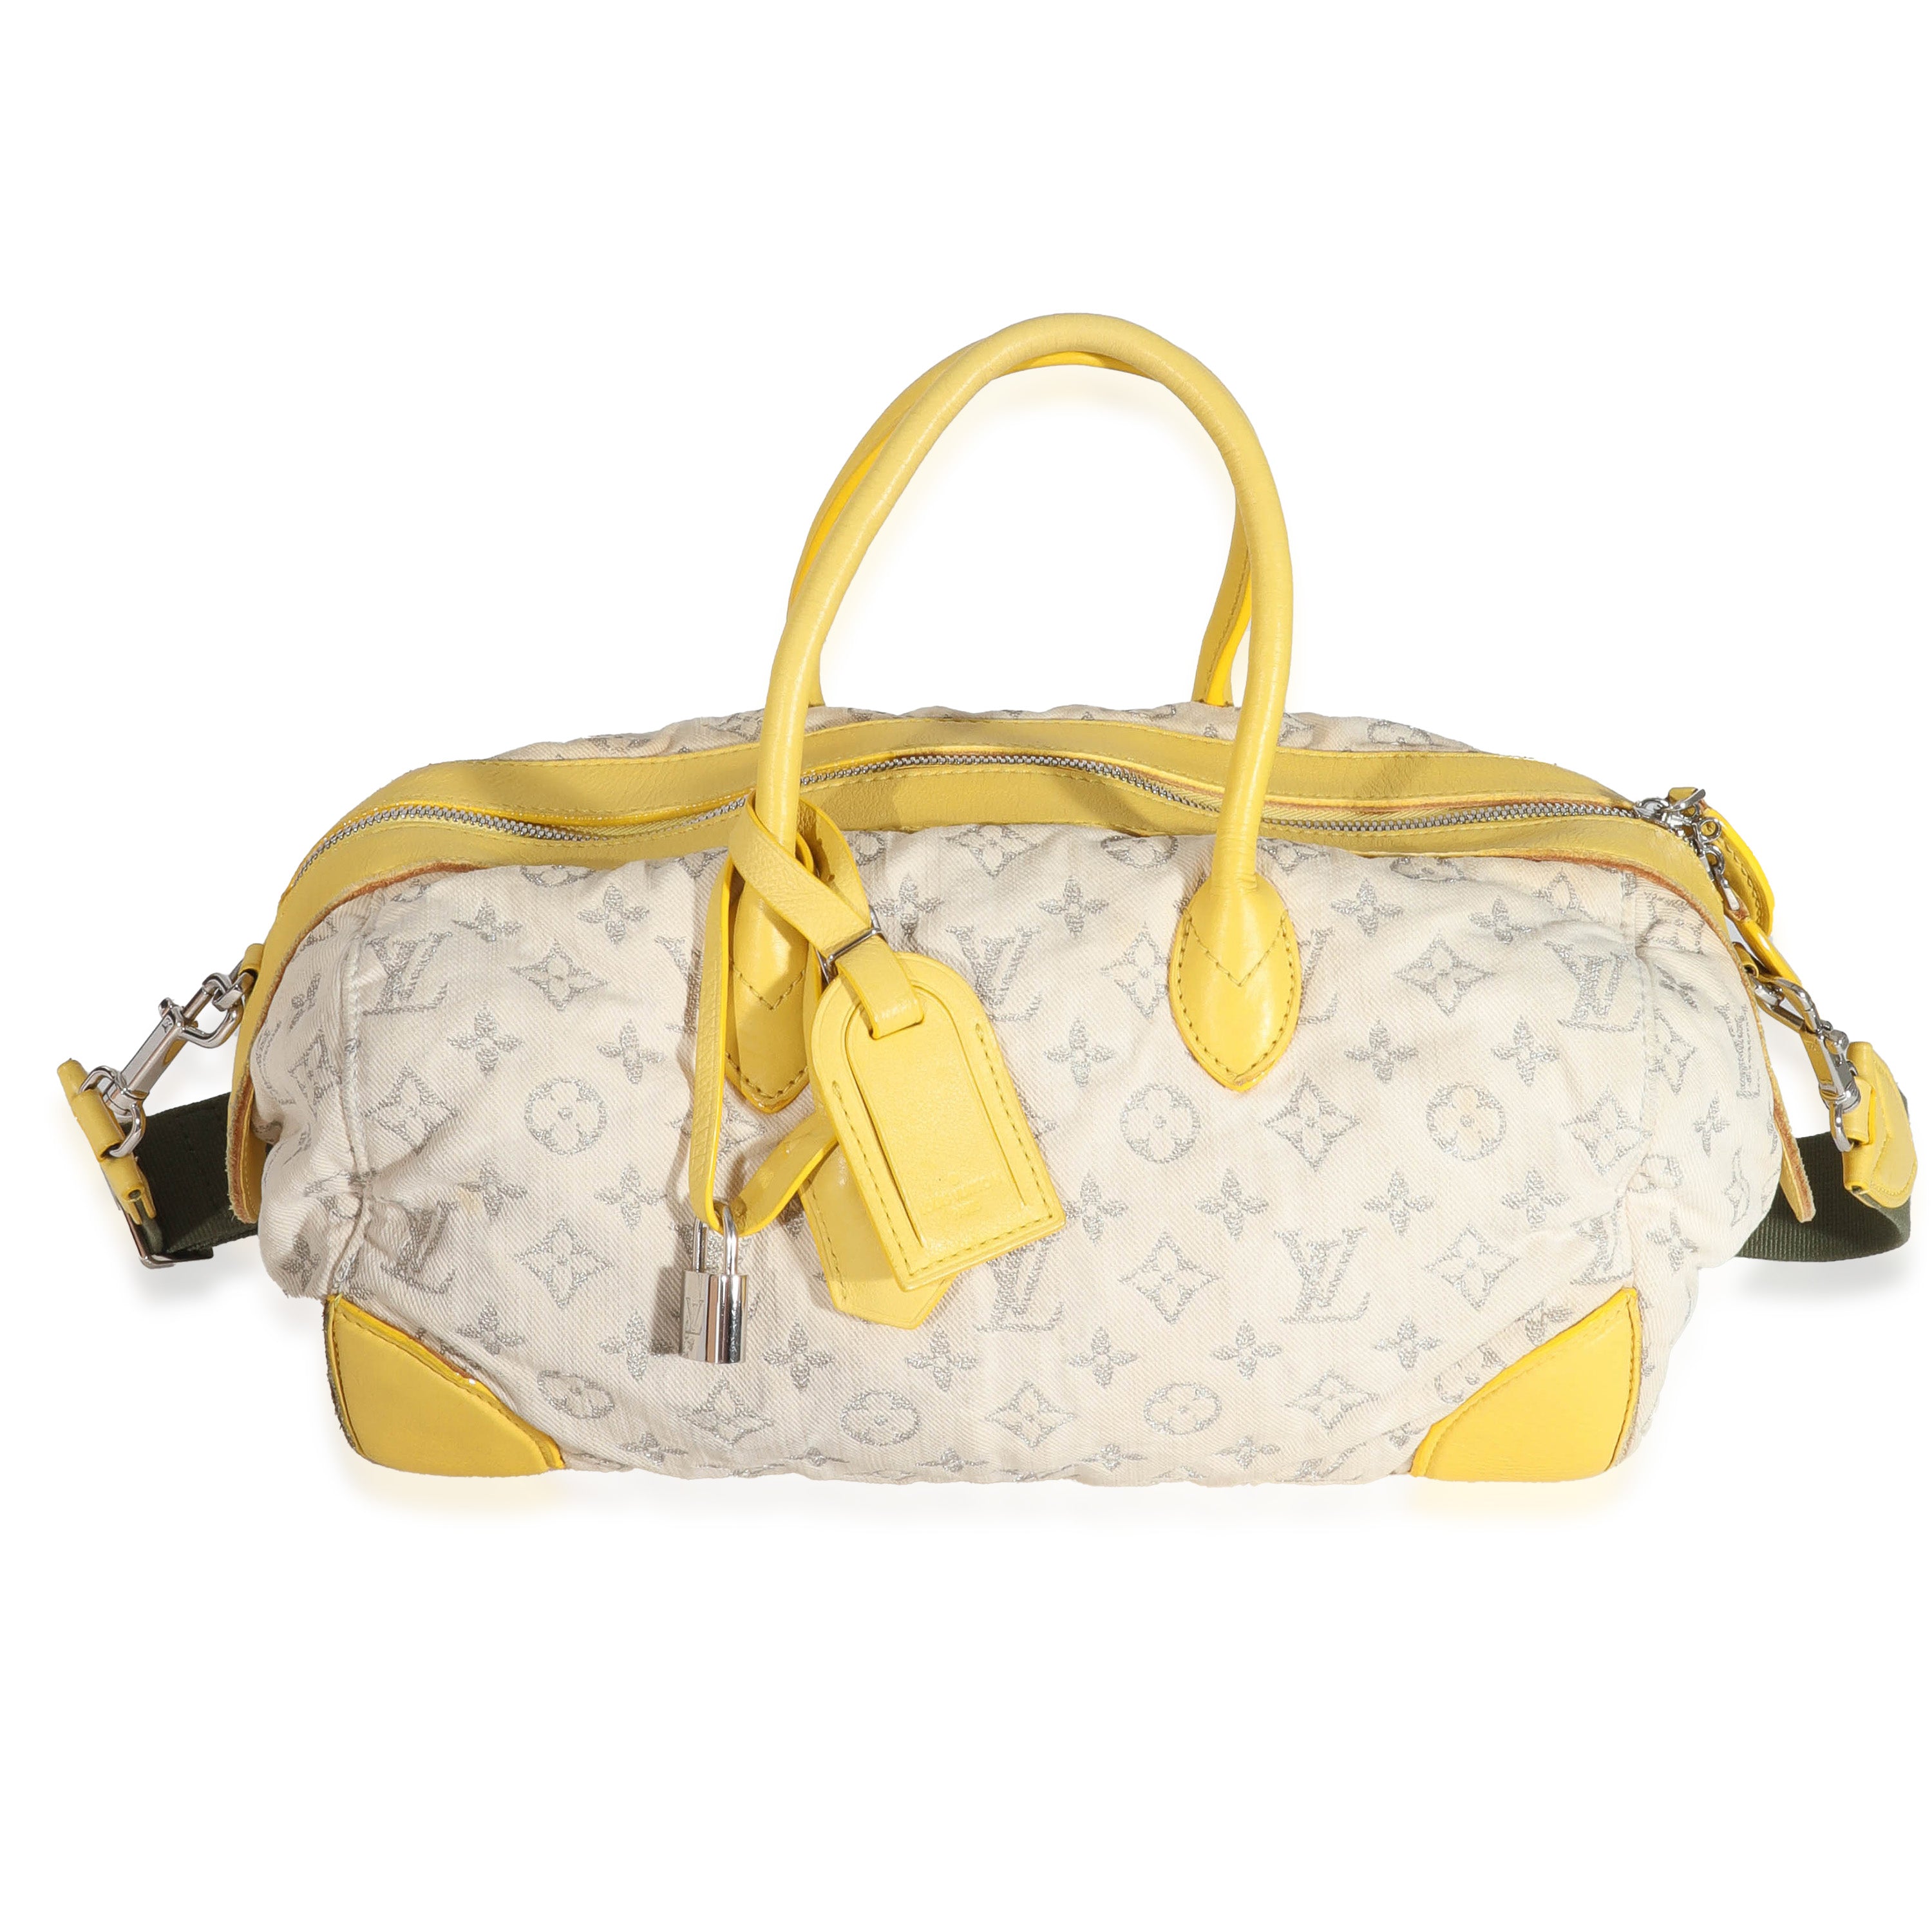 LV logo monogram with triangle shape and circle rounded style